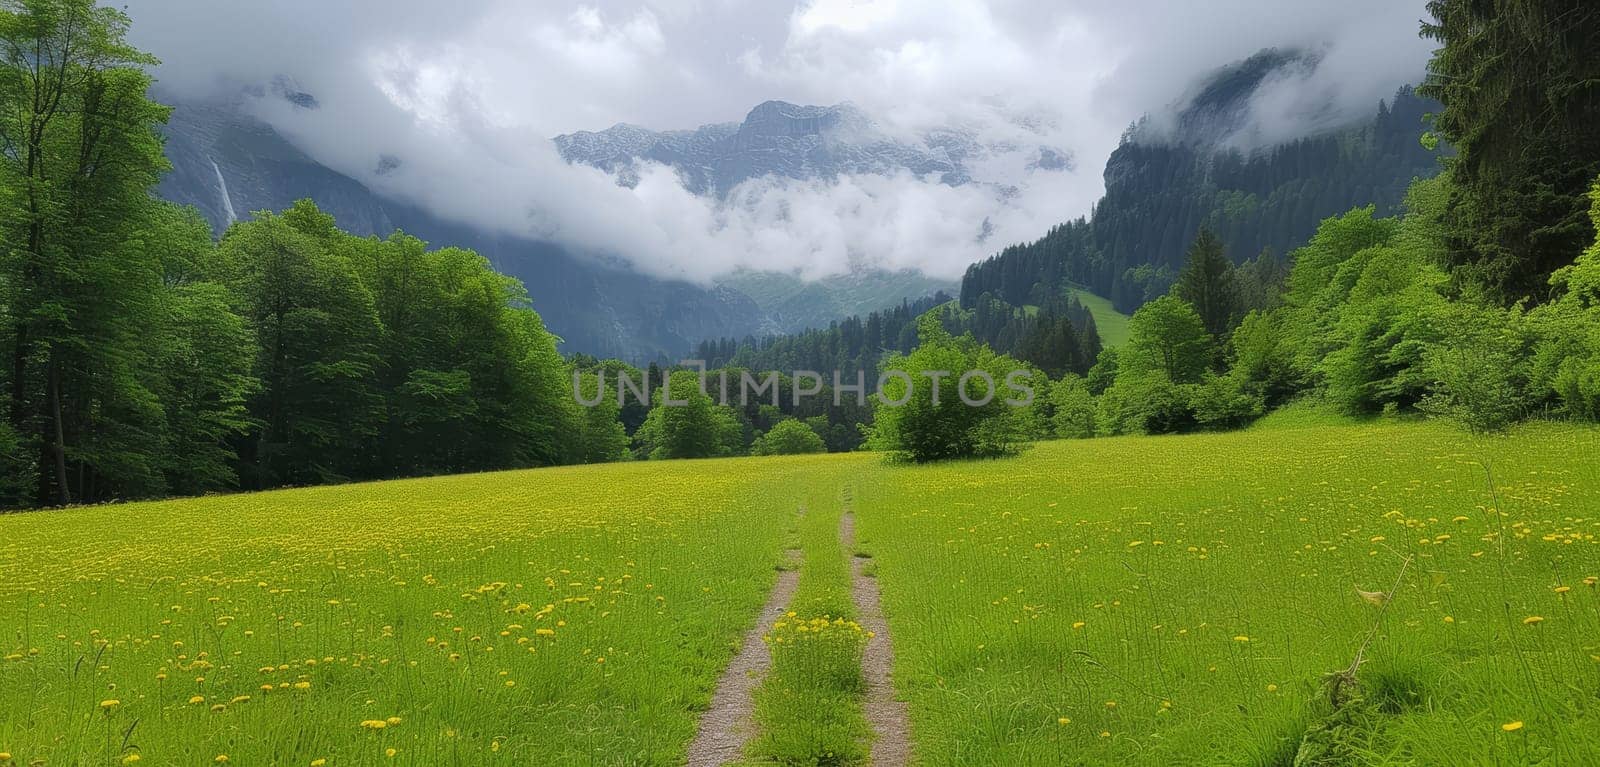 Serene path through a lush green valley with towering mountains in the background. by sfinks